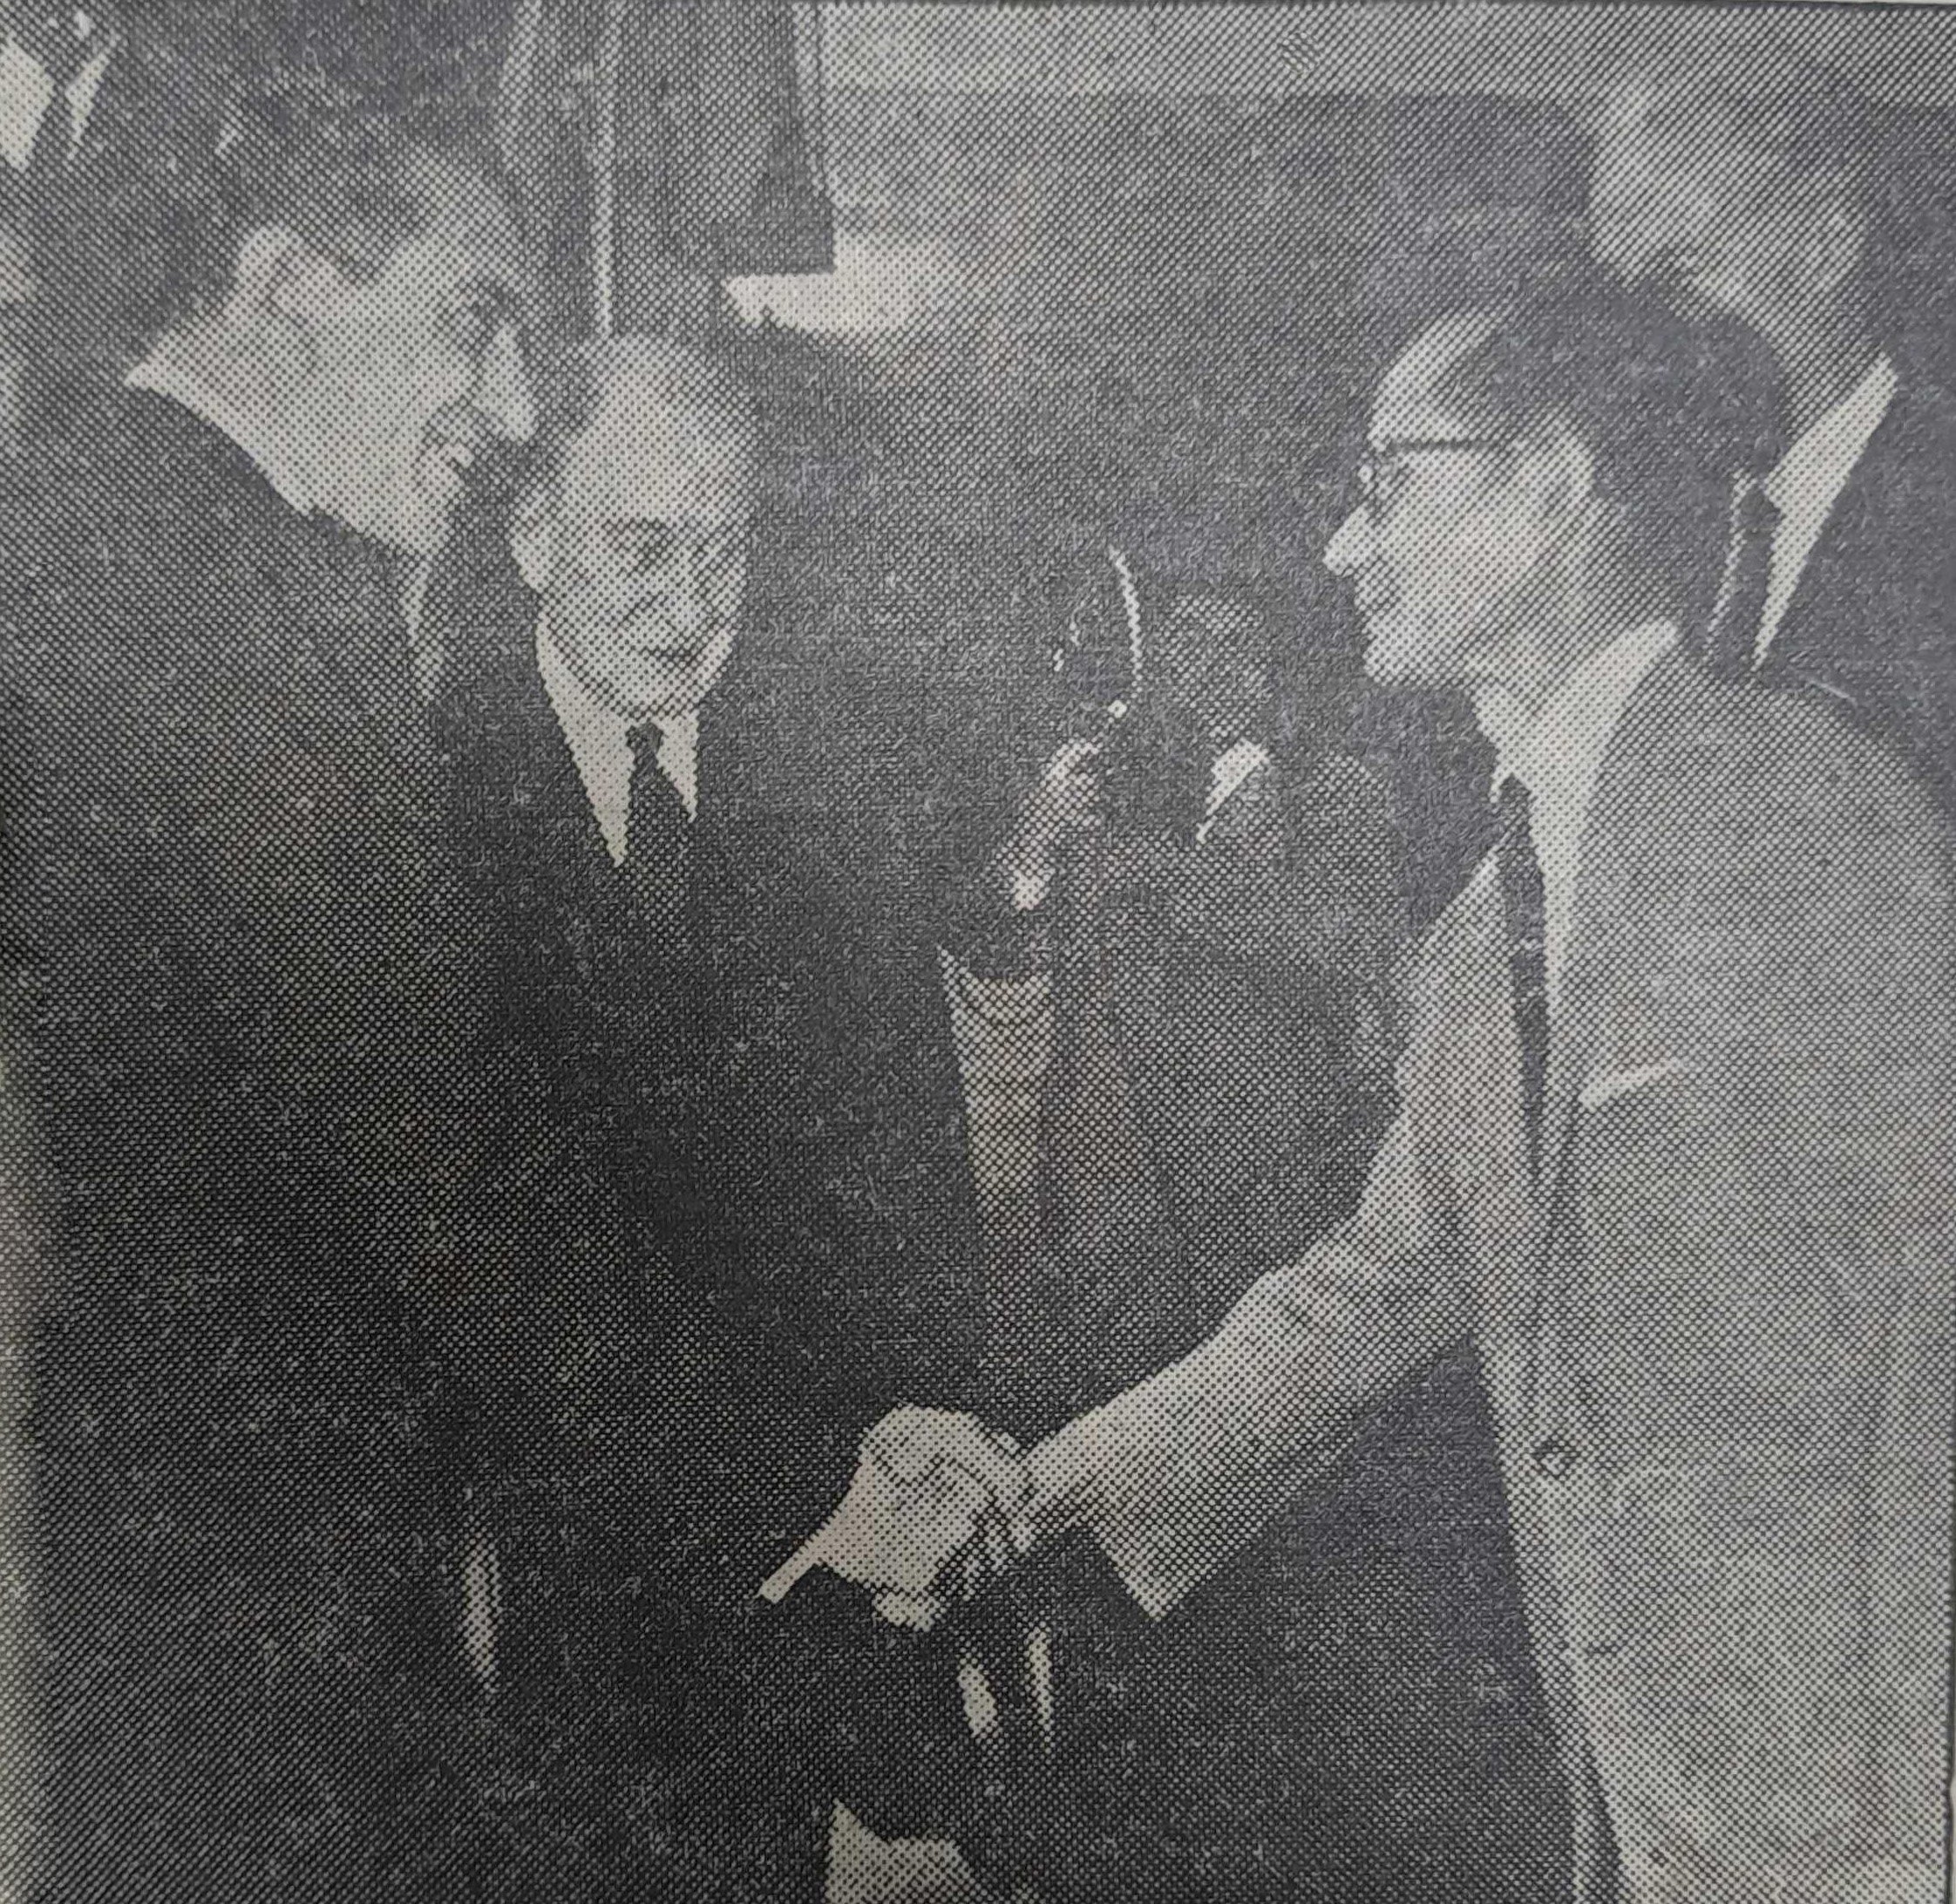 Mexican president Adolfo Lopez Mateos (left) is greeted by local representatives at Hong Kong’s Kai Tak Airport, on October 6, 1962. During a press conference at the airport, he refused to comment on the “build-up” in Cuba. Photo: SCMP